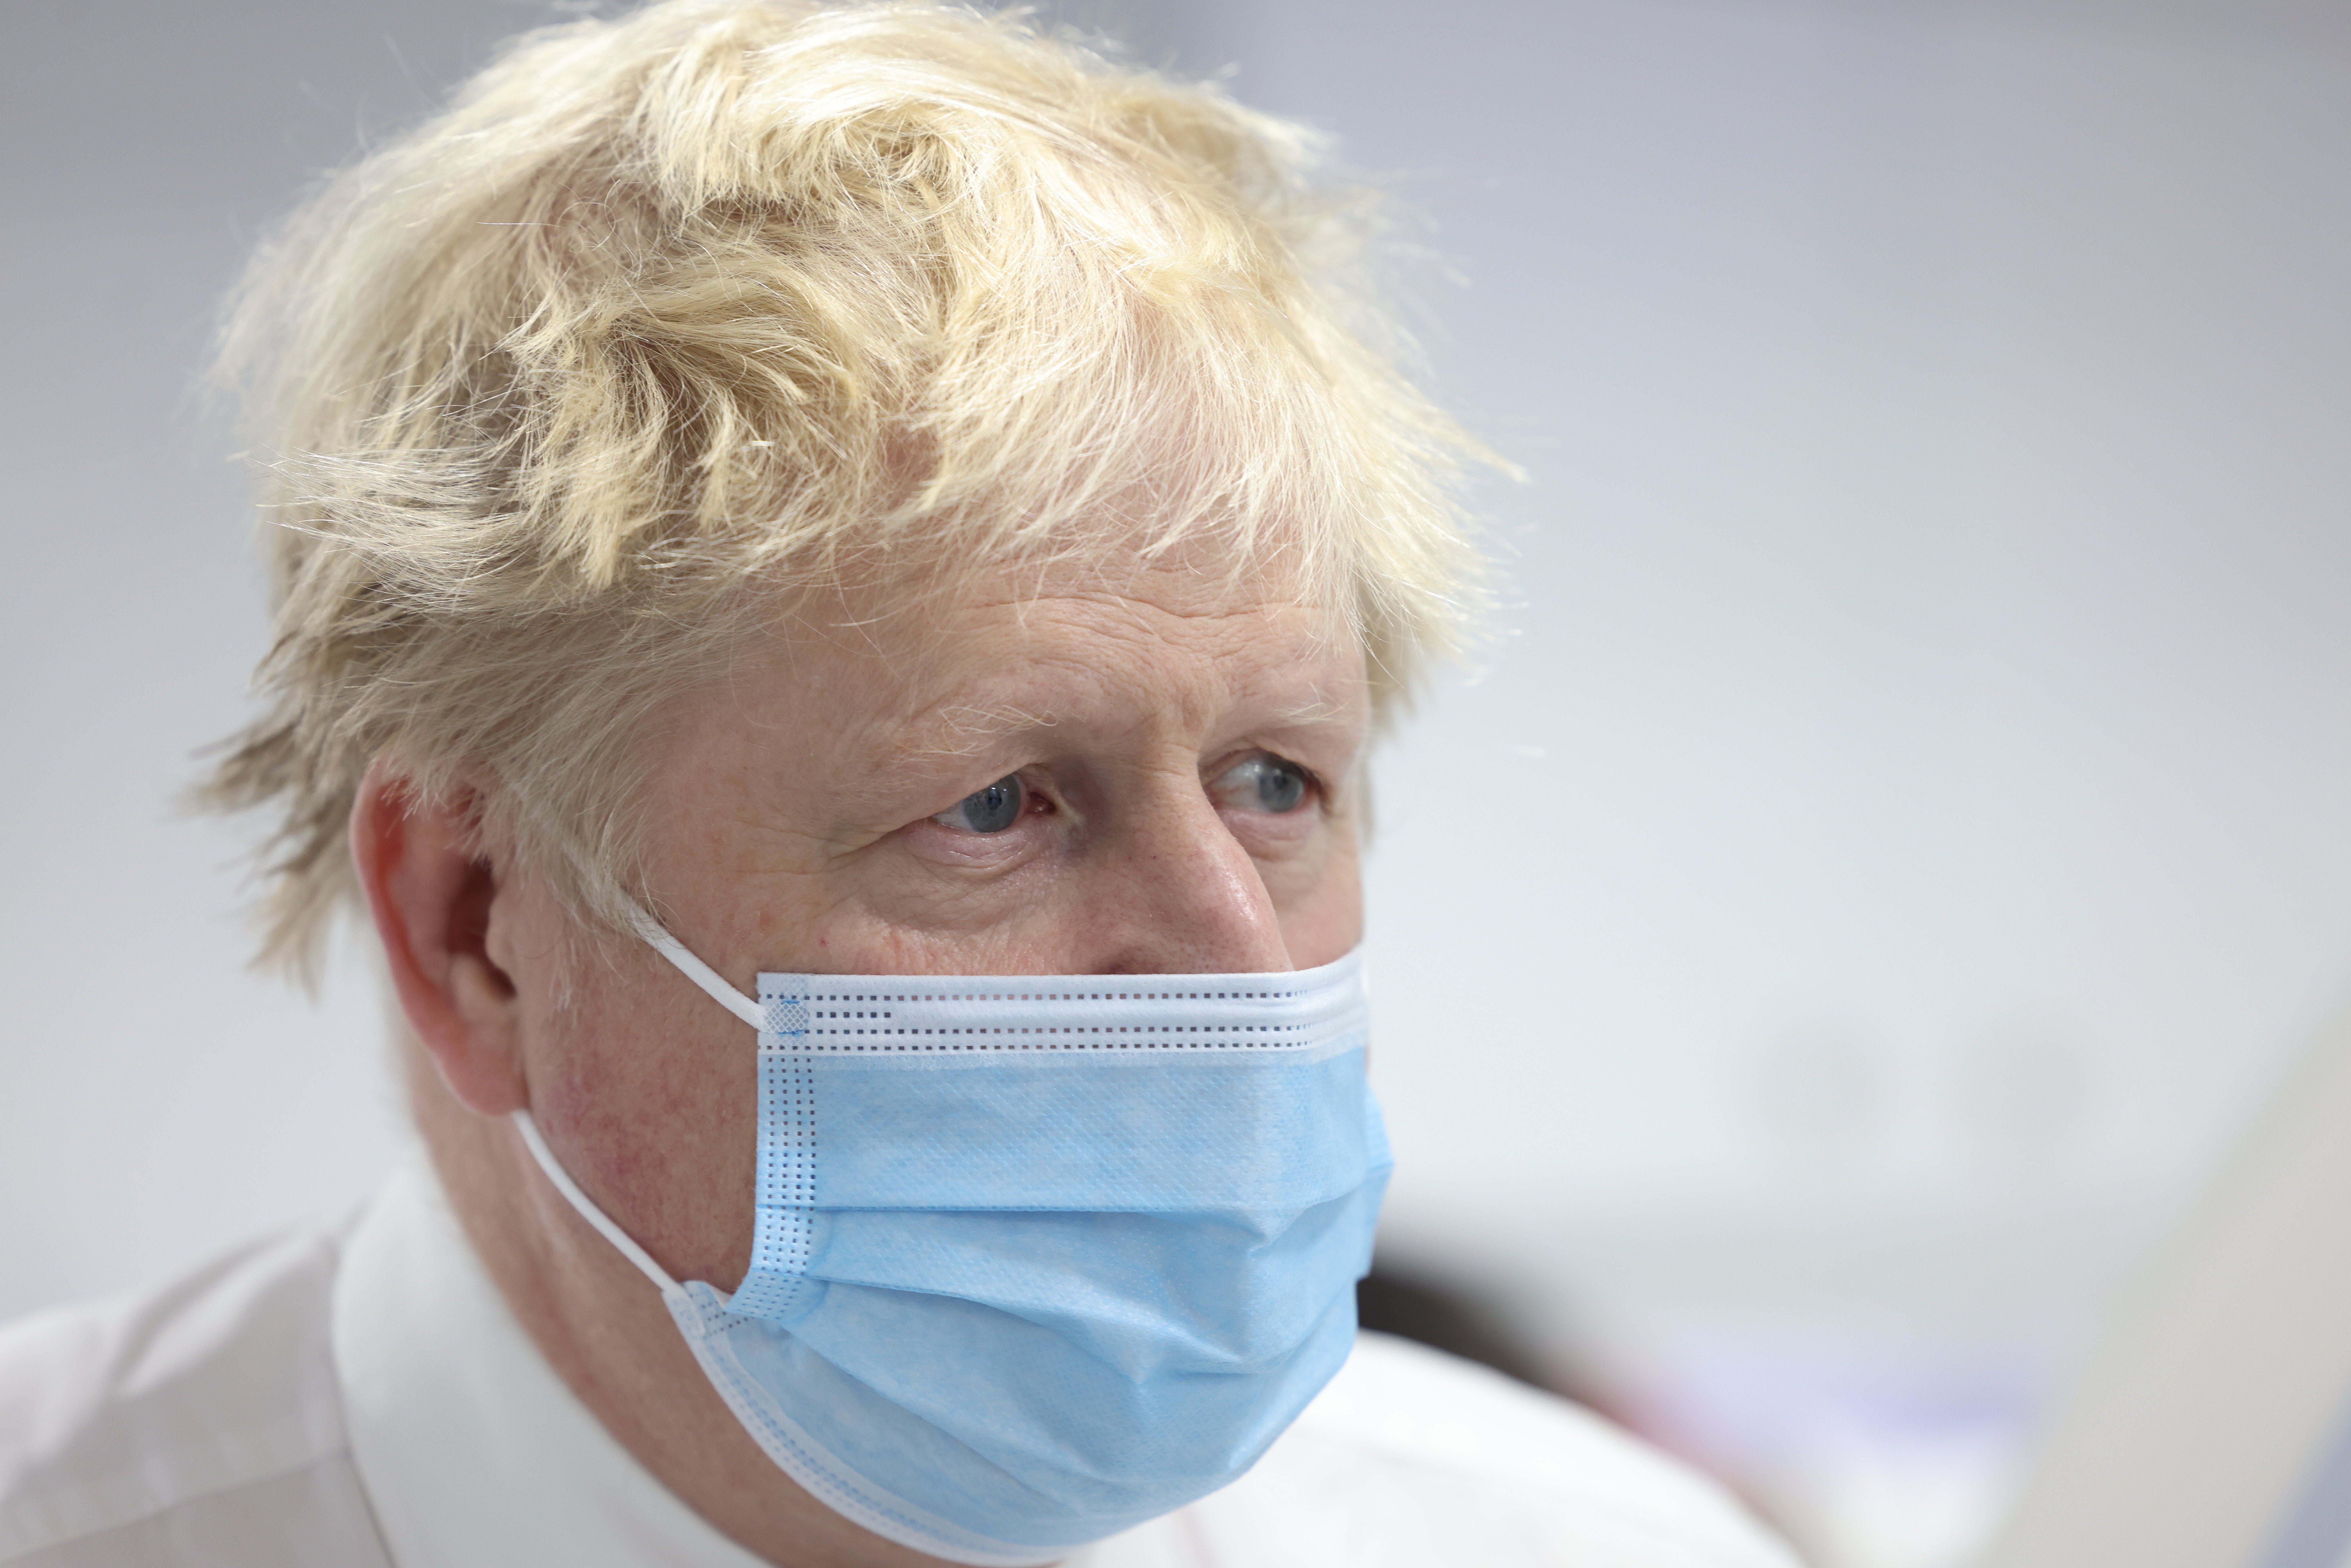 Prime Minister Boris Johnson during a visit to the Finchley Memorial Hospital in North London. (Ian Vogler/PA)